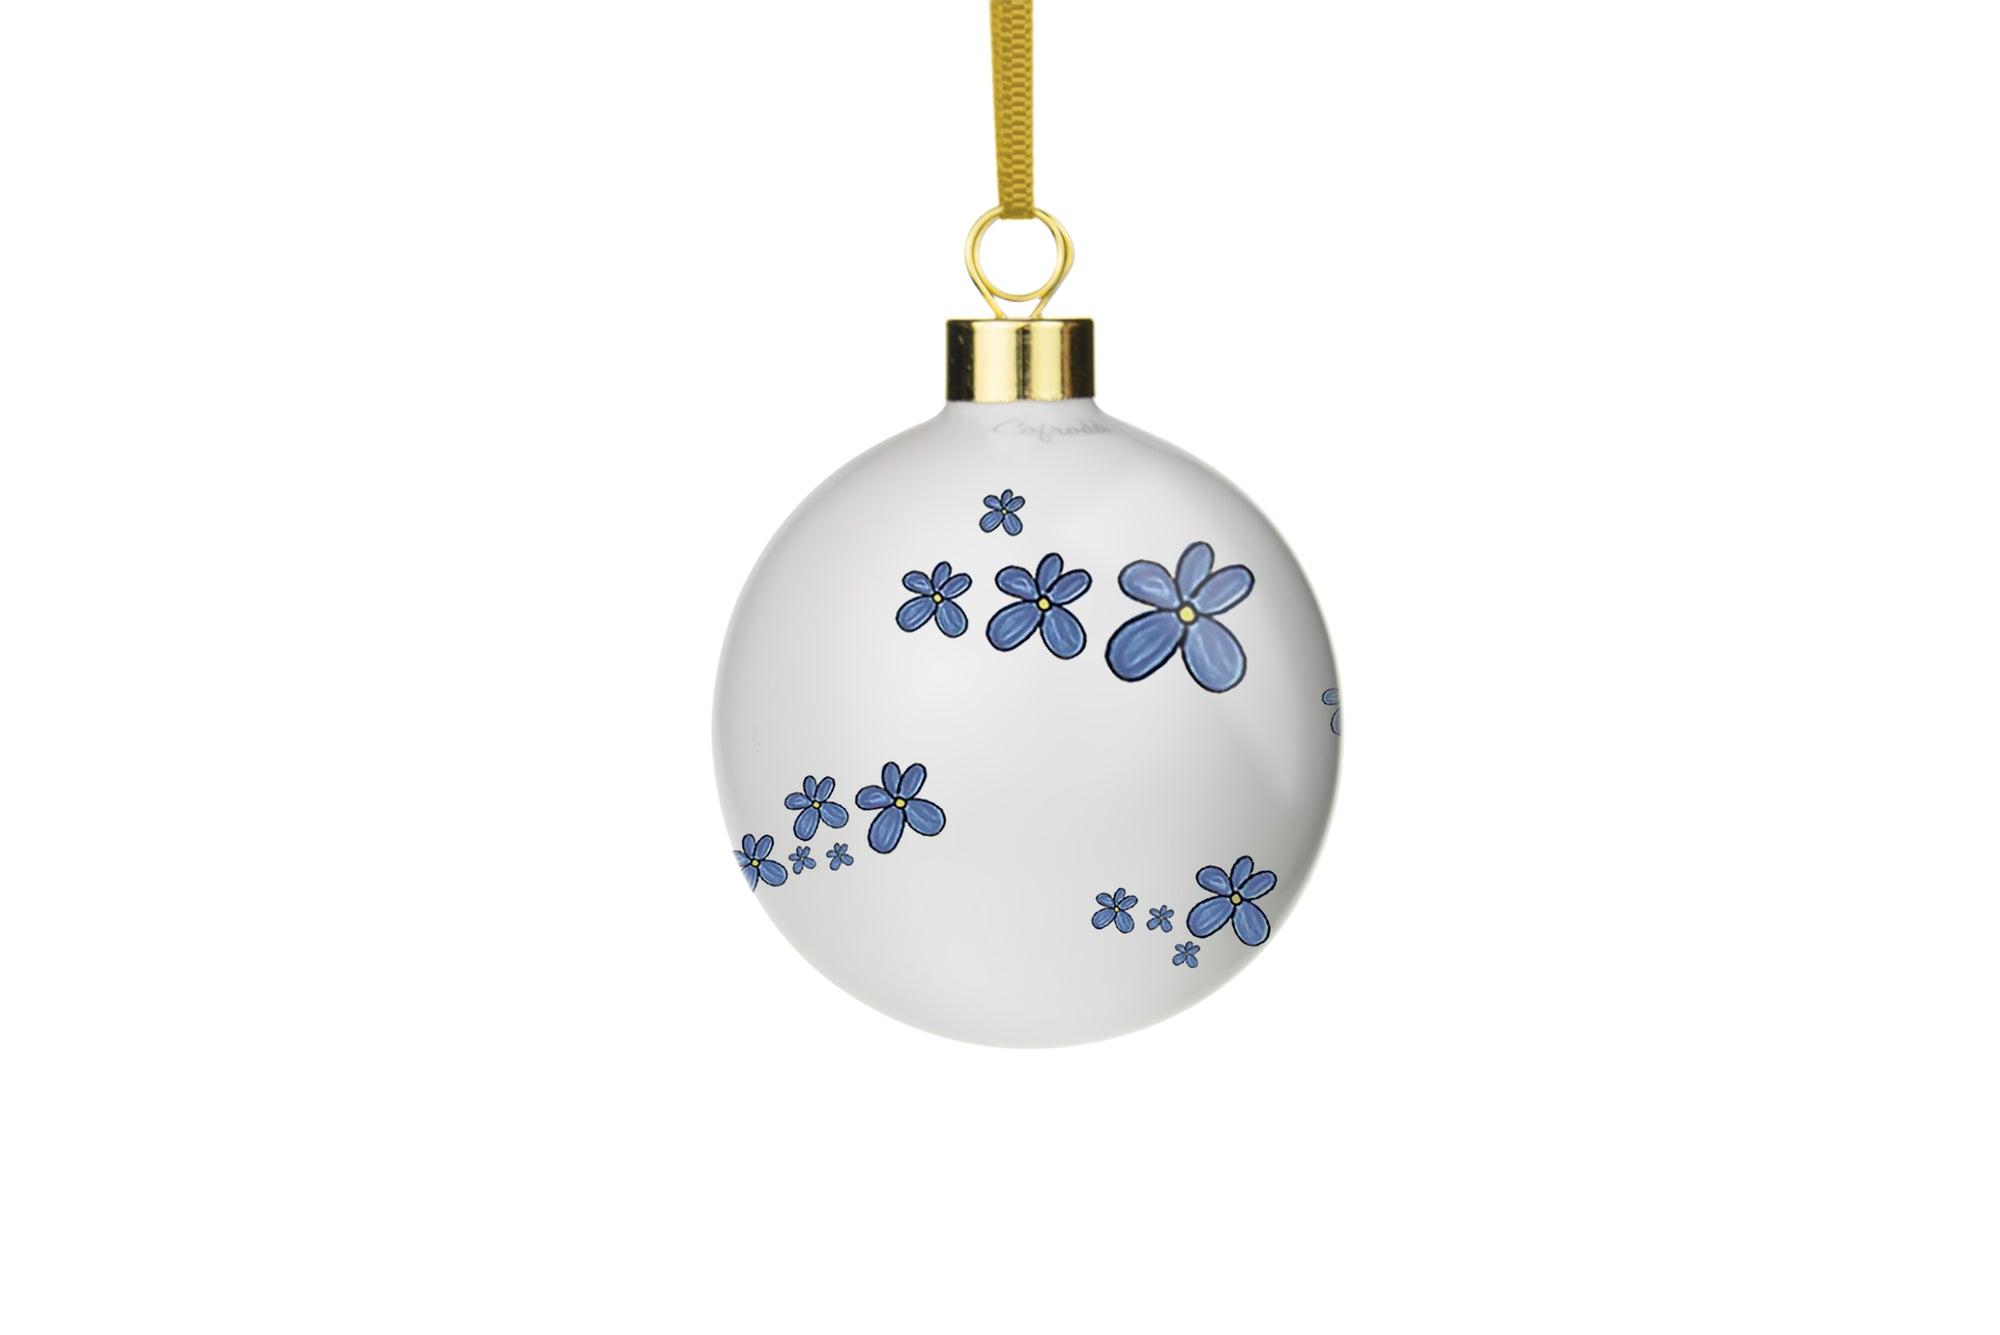 Forget-me-not bauble